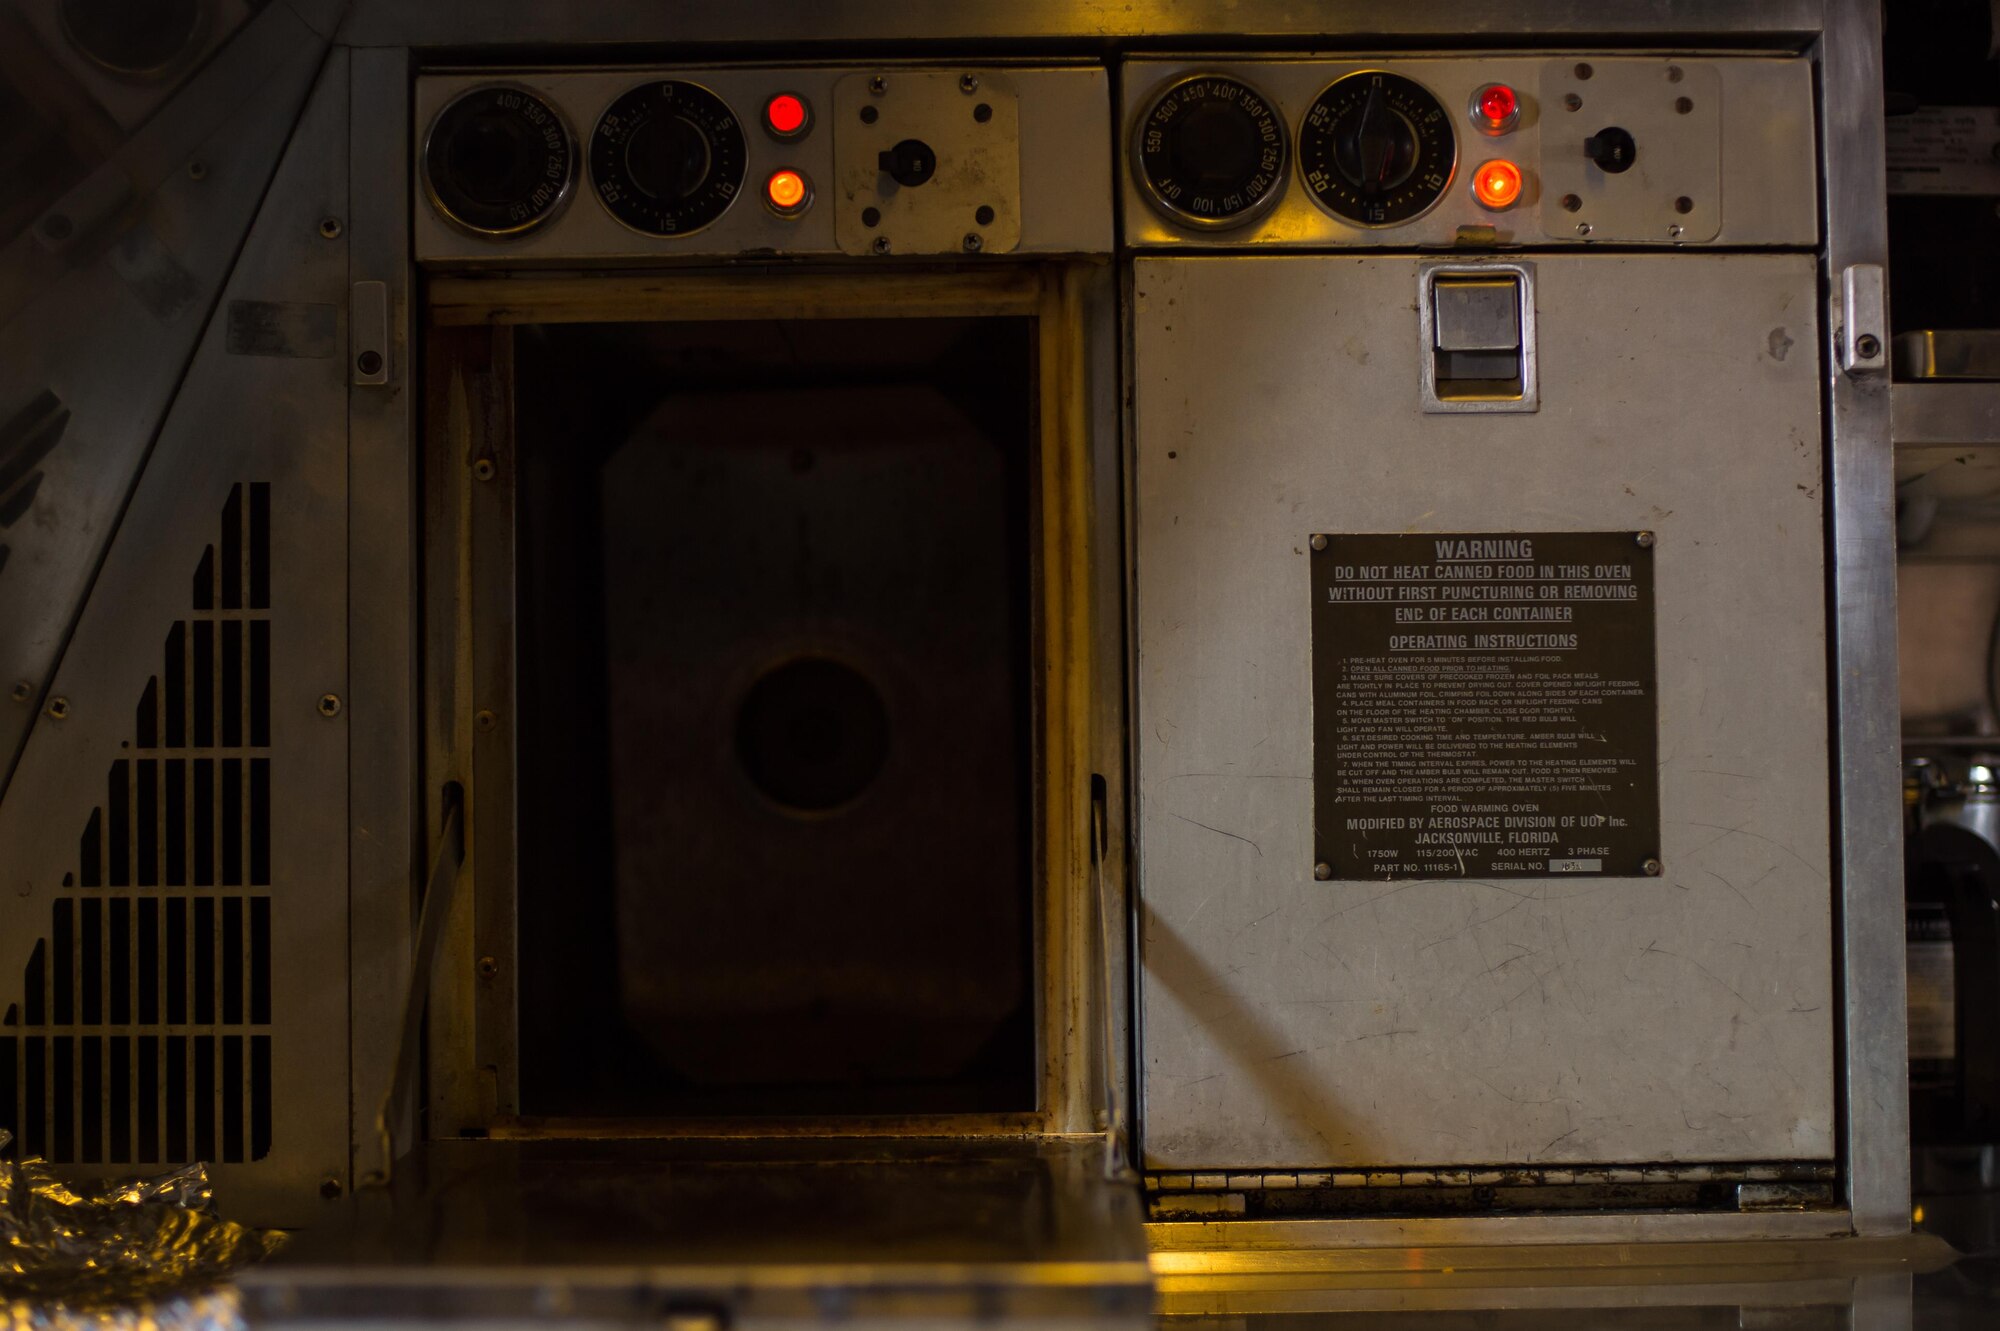 A KC-10 Extender oven is heated for a holiday meal during a sortie supporting Combined Joint Task Force-Operation Inherent Resolve over Iraq, Dec. 25, 2016. During the flight, crew members ate pizza, pita bread, chocolate chip cookies and pita bread. (U.S. Air Force photo/Senior Airman Tyler Woodward)